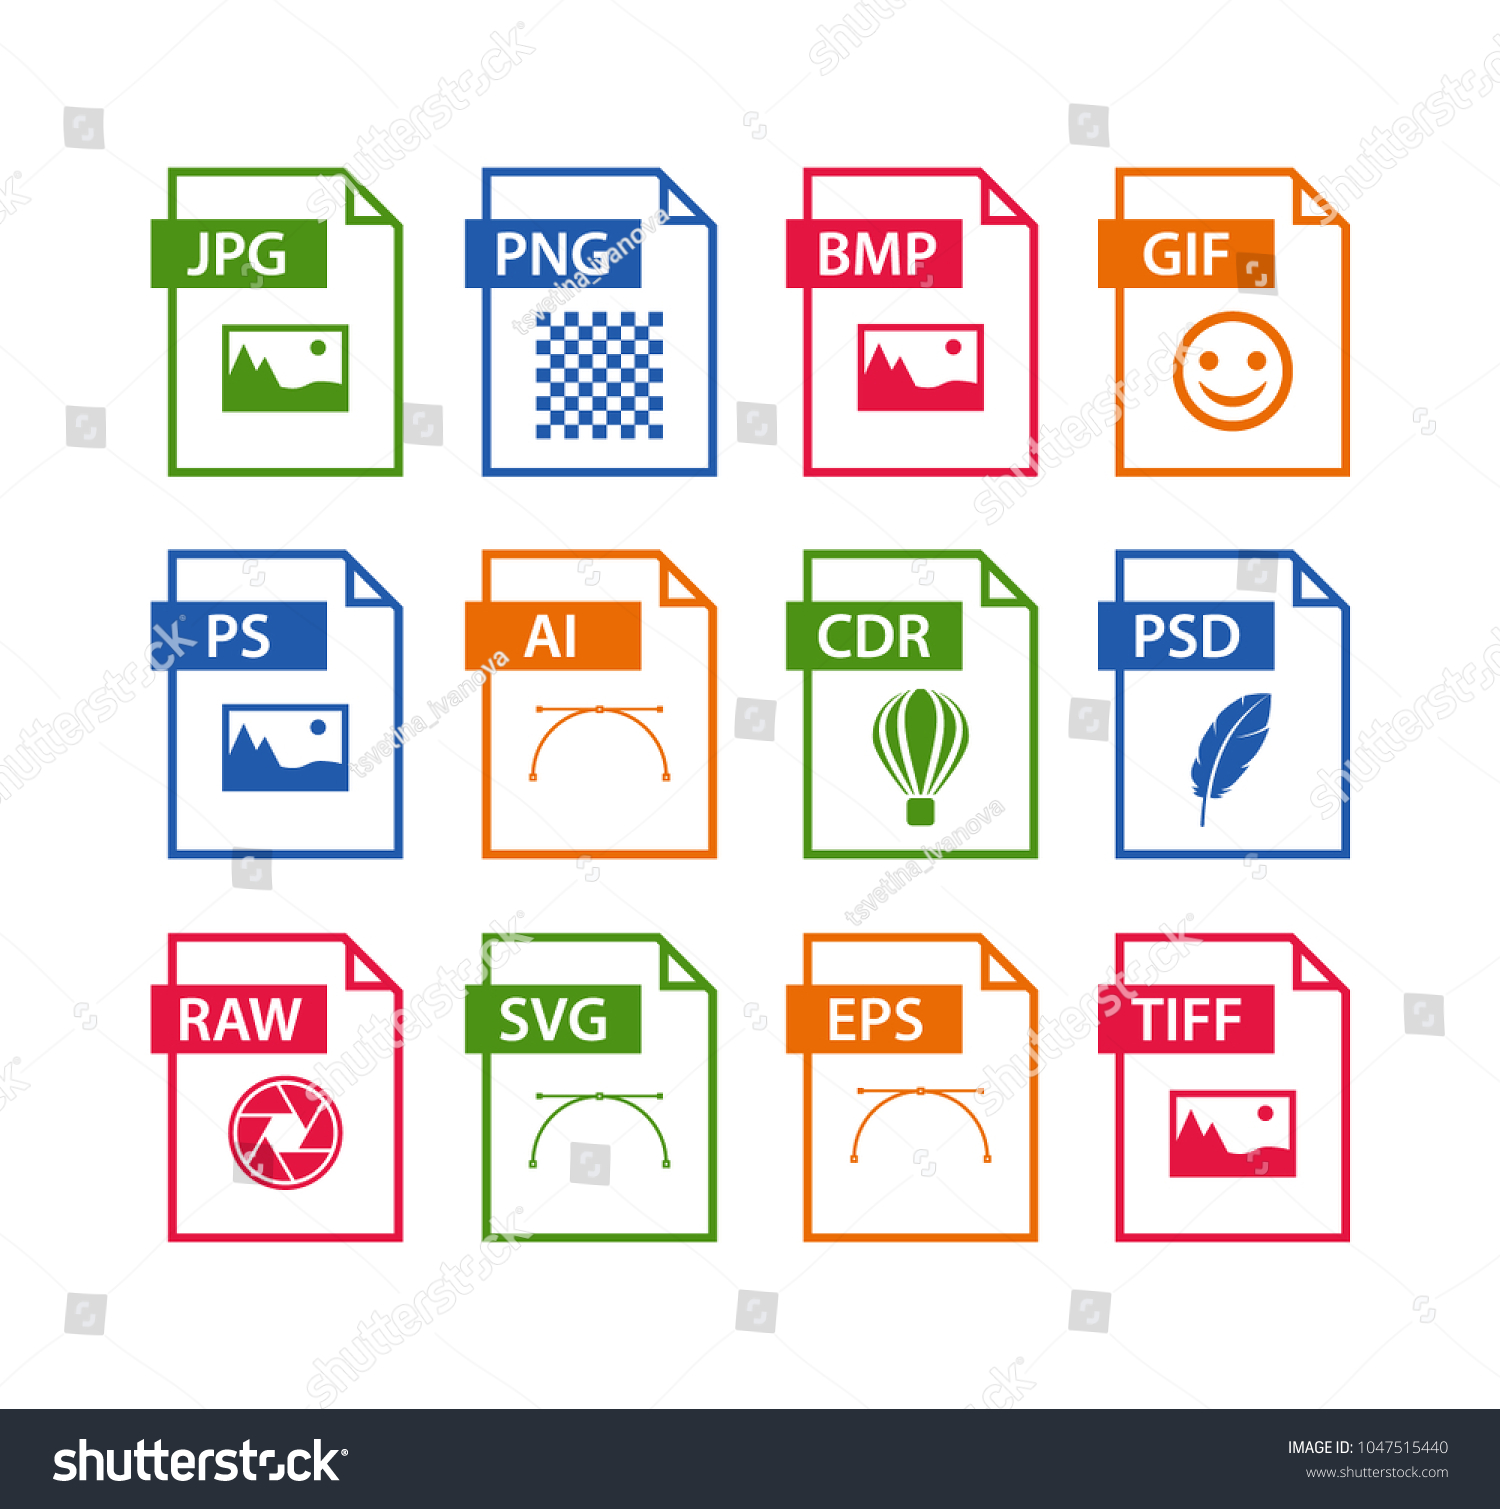 SVG of file format icon set. images file type icons. pictures file format icons svg